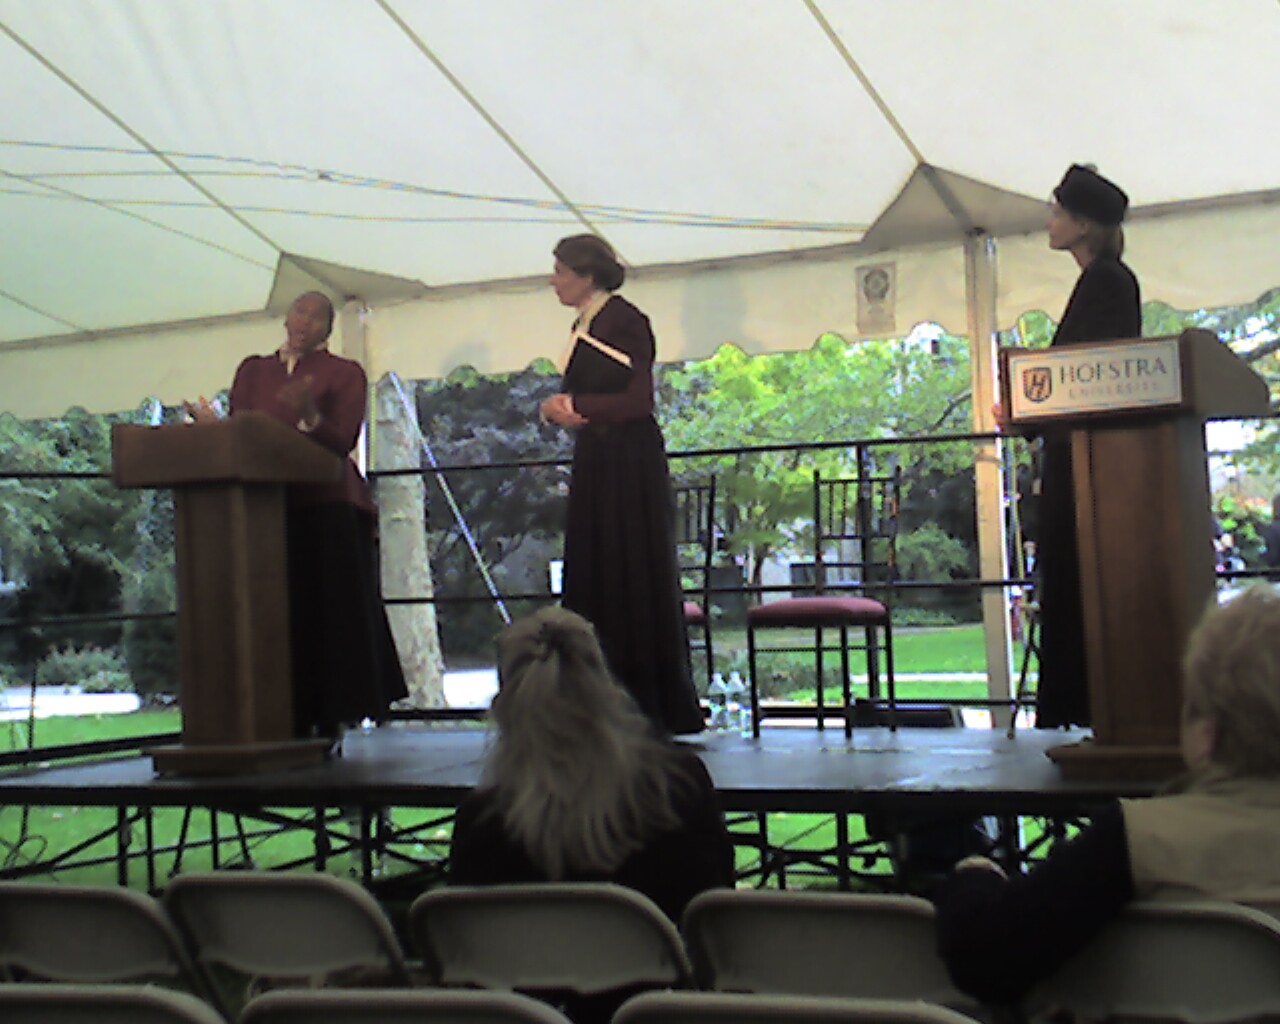 Frances Watkins Harper, Susan B. Anthony and Victoria Woodhull at the Hofstra pre-debate activities